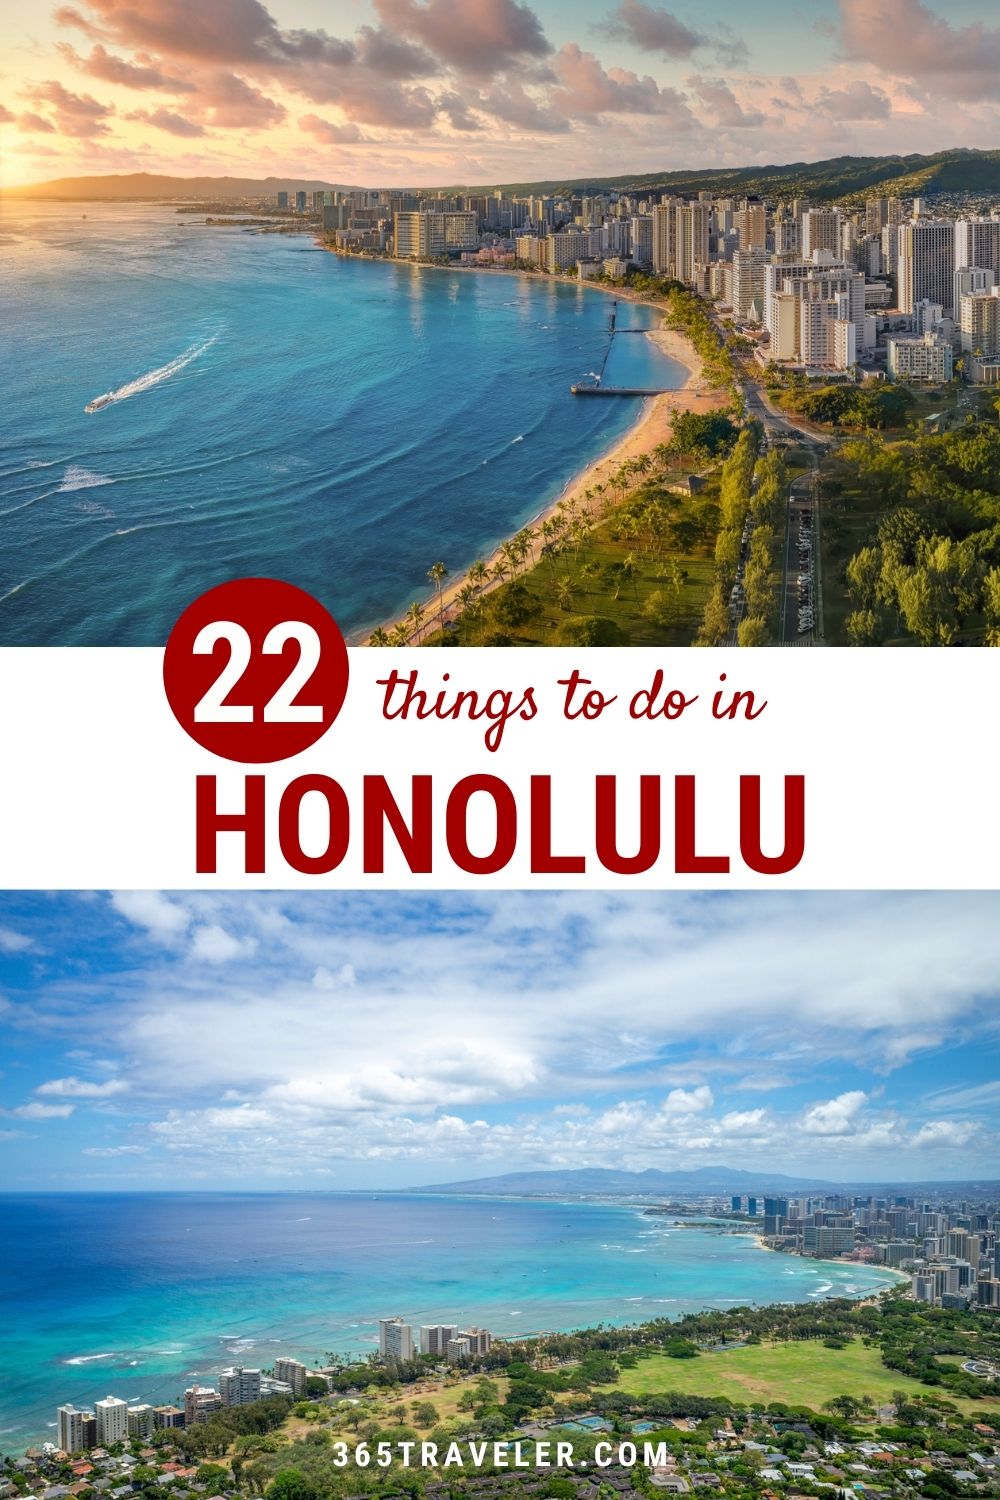 22 Absolutely Amazing Things To Do in Honolulu